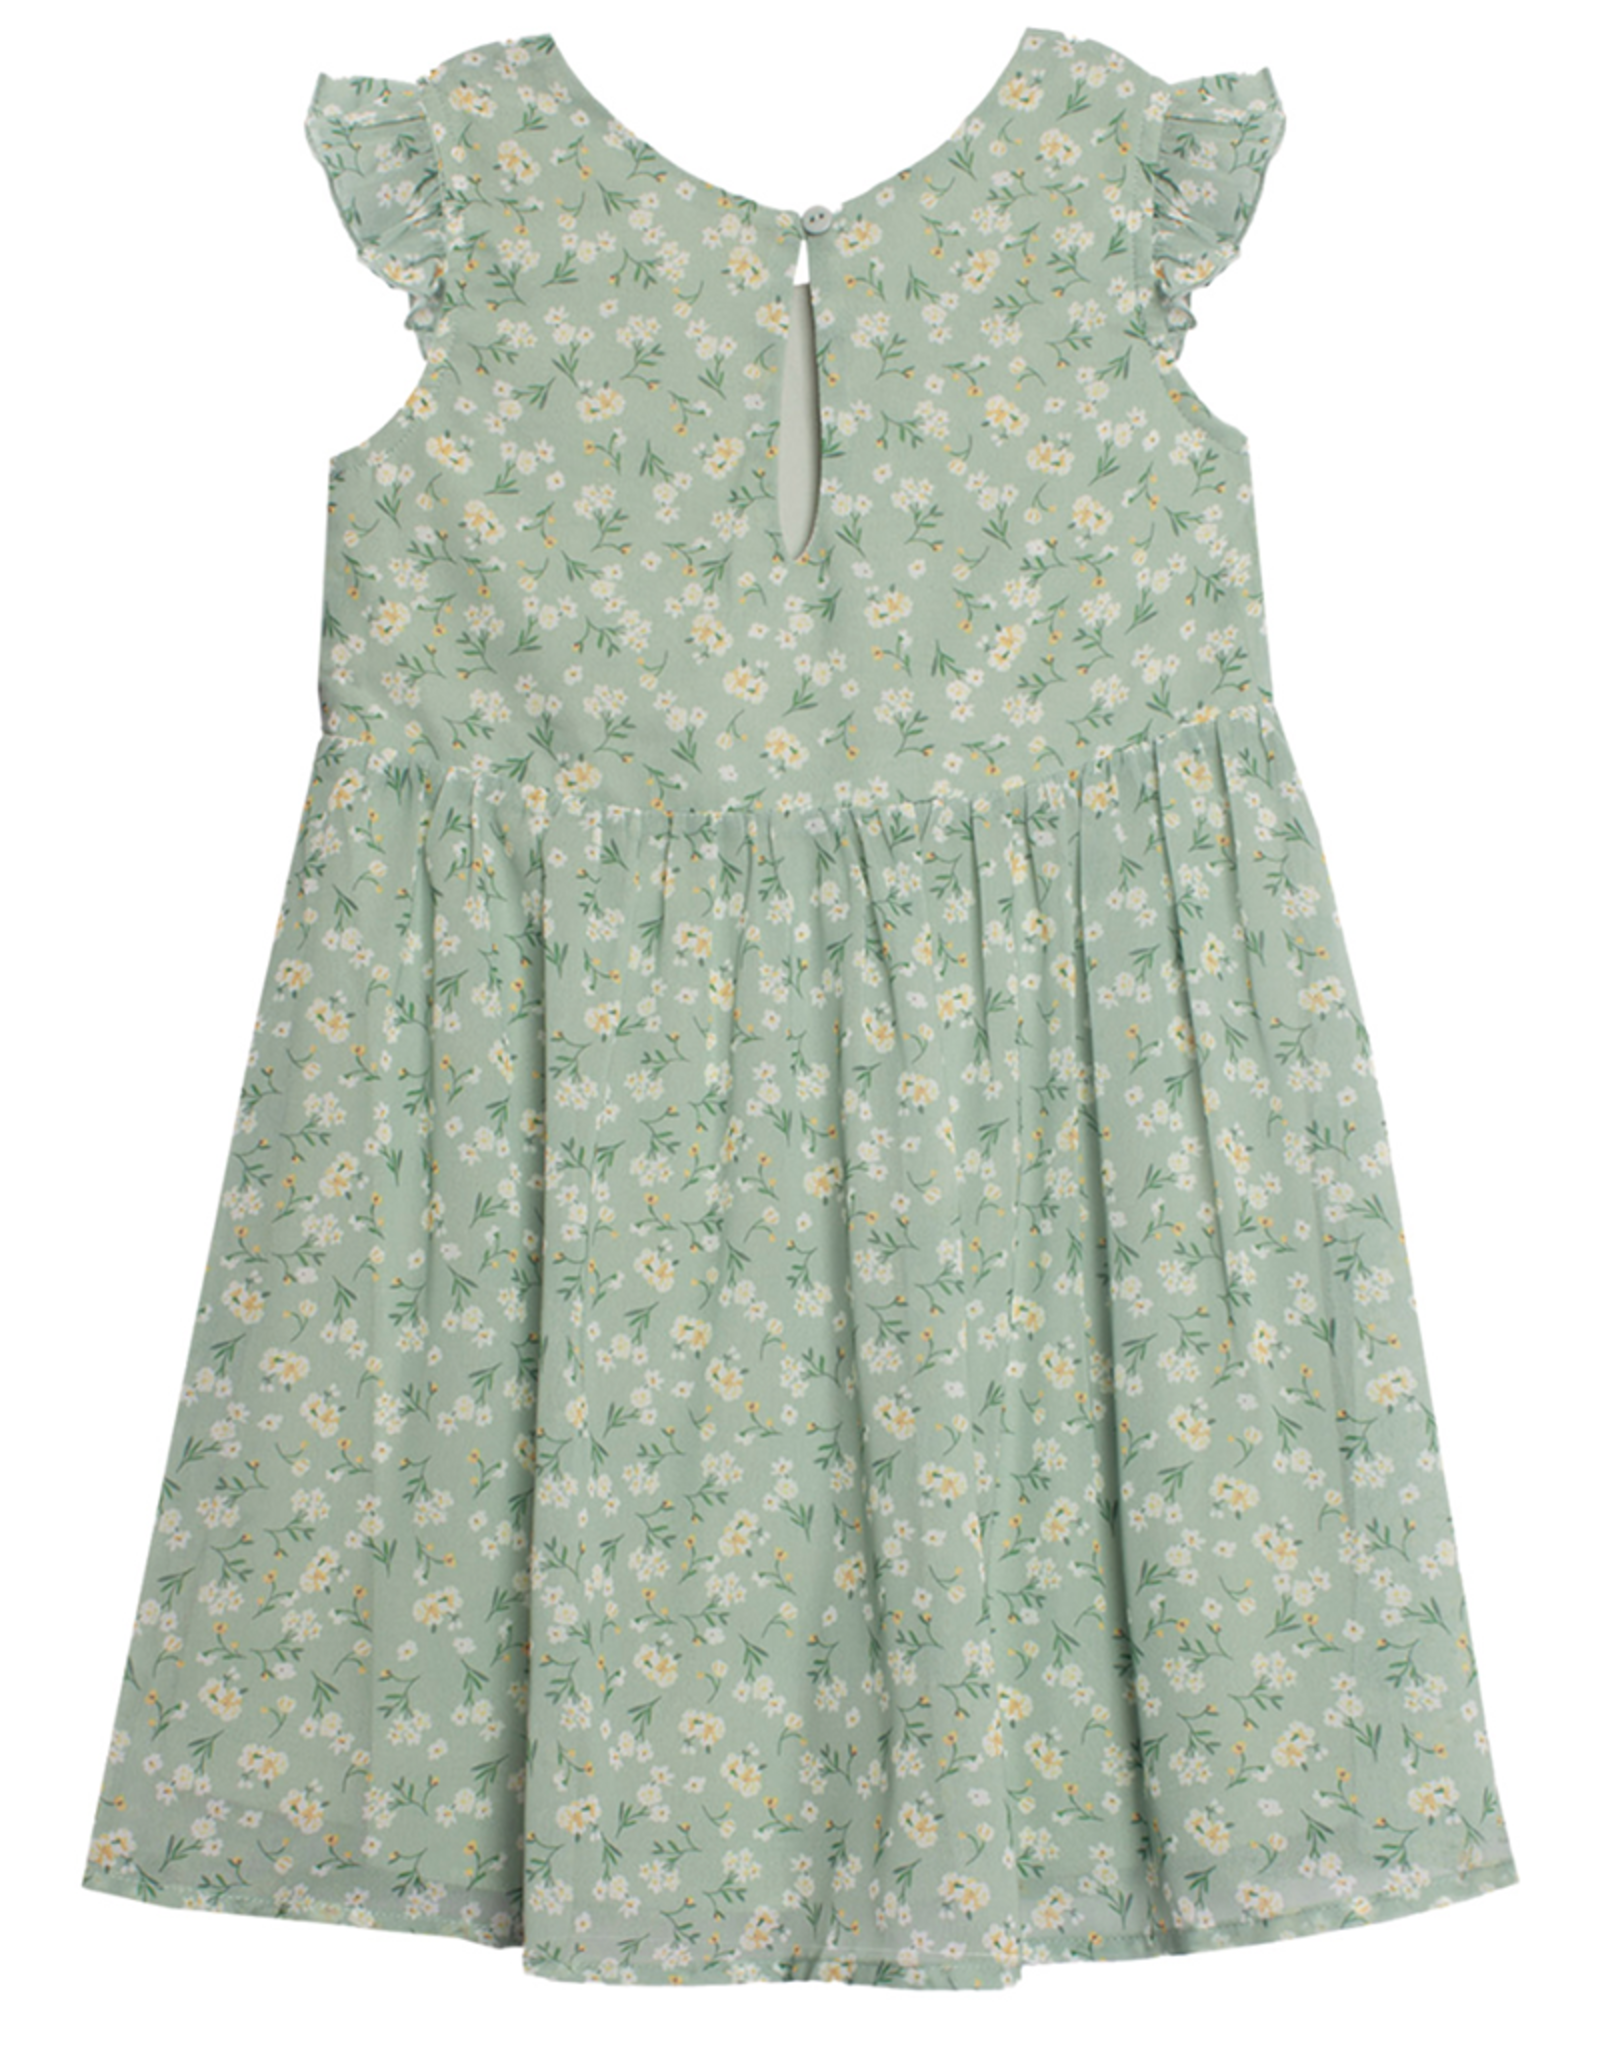 Mabel and Honey 6670GN Garden Party Dress